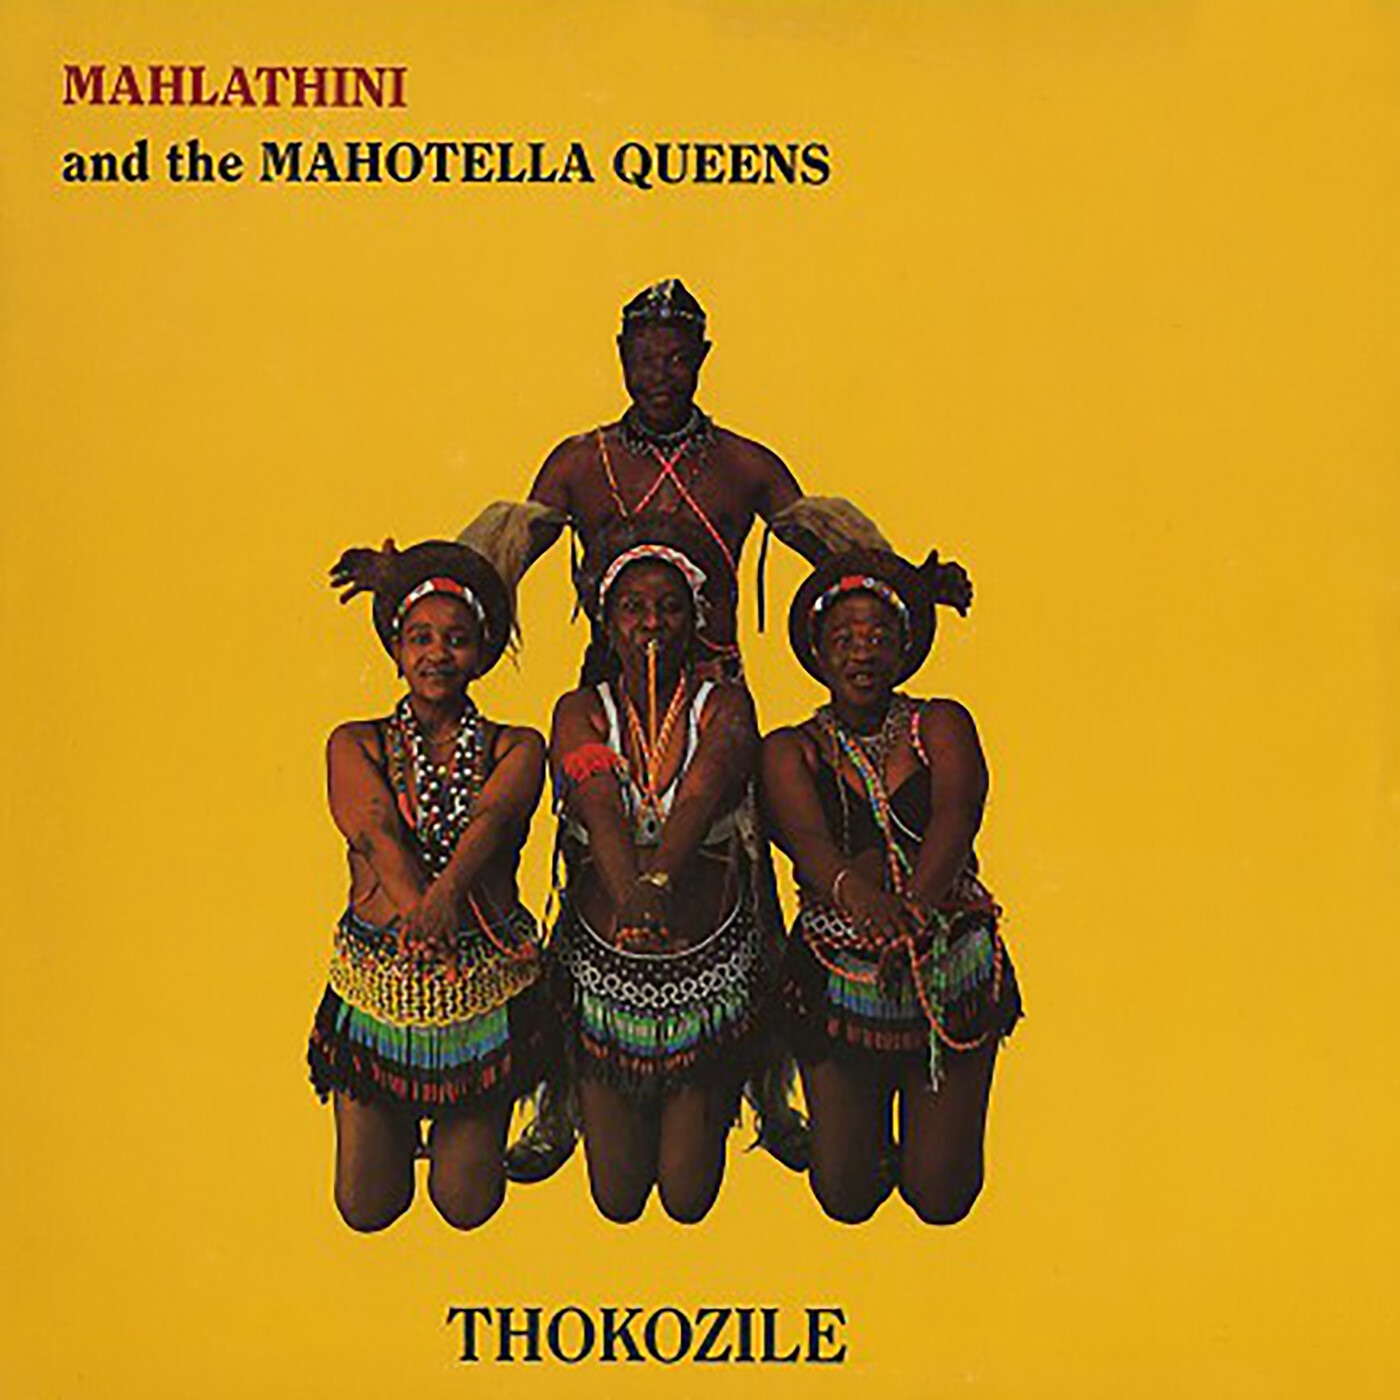 Thokozile by Mahlathini and the Mahotella Queens